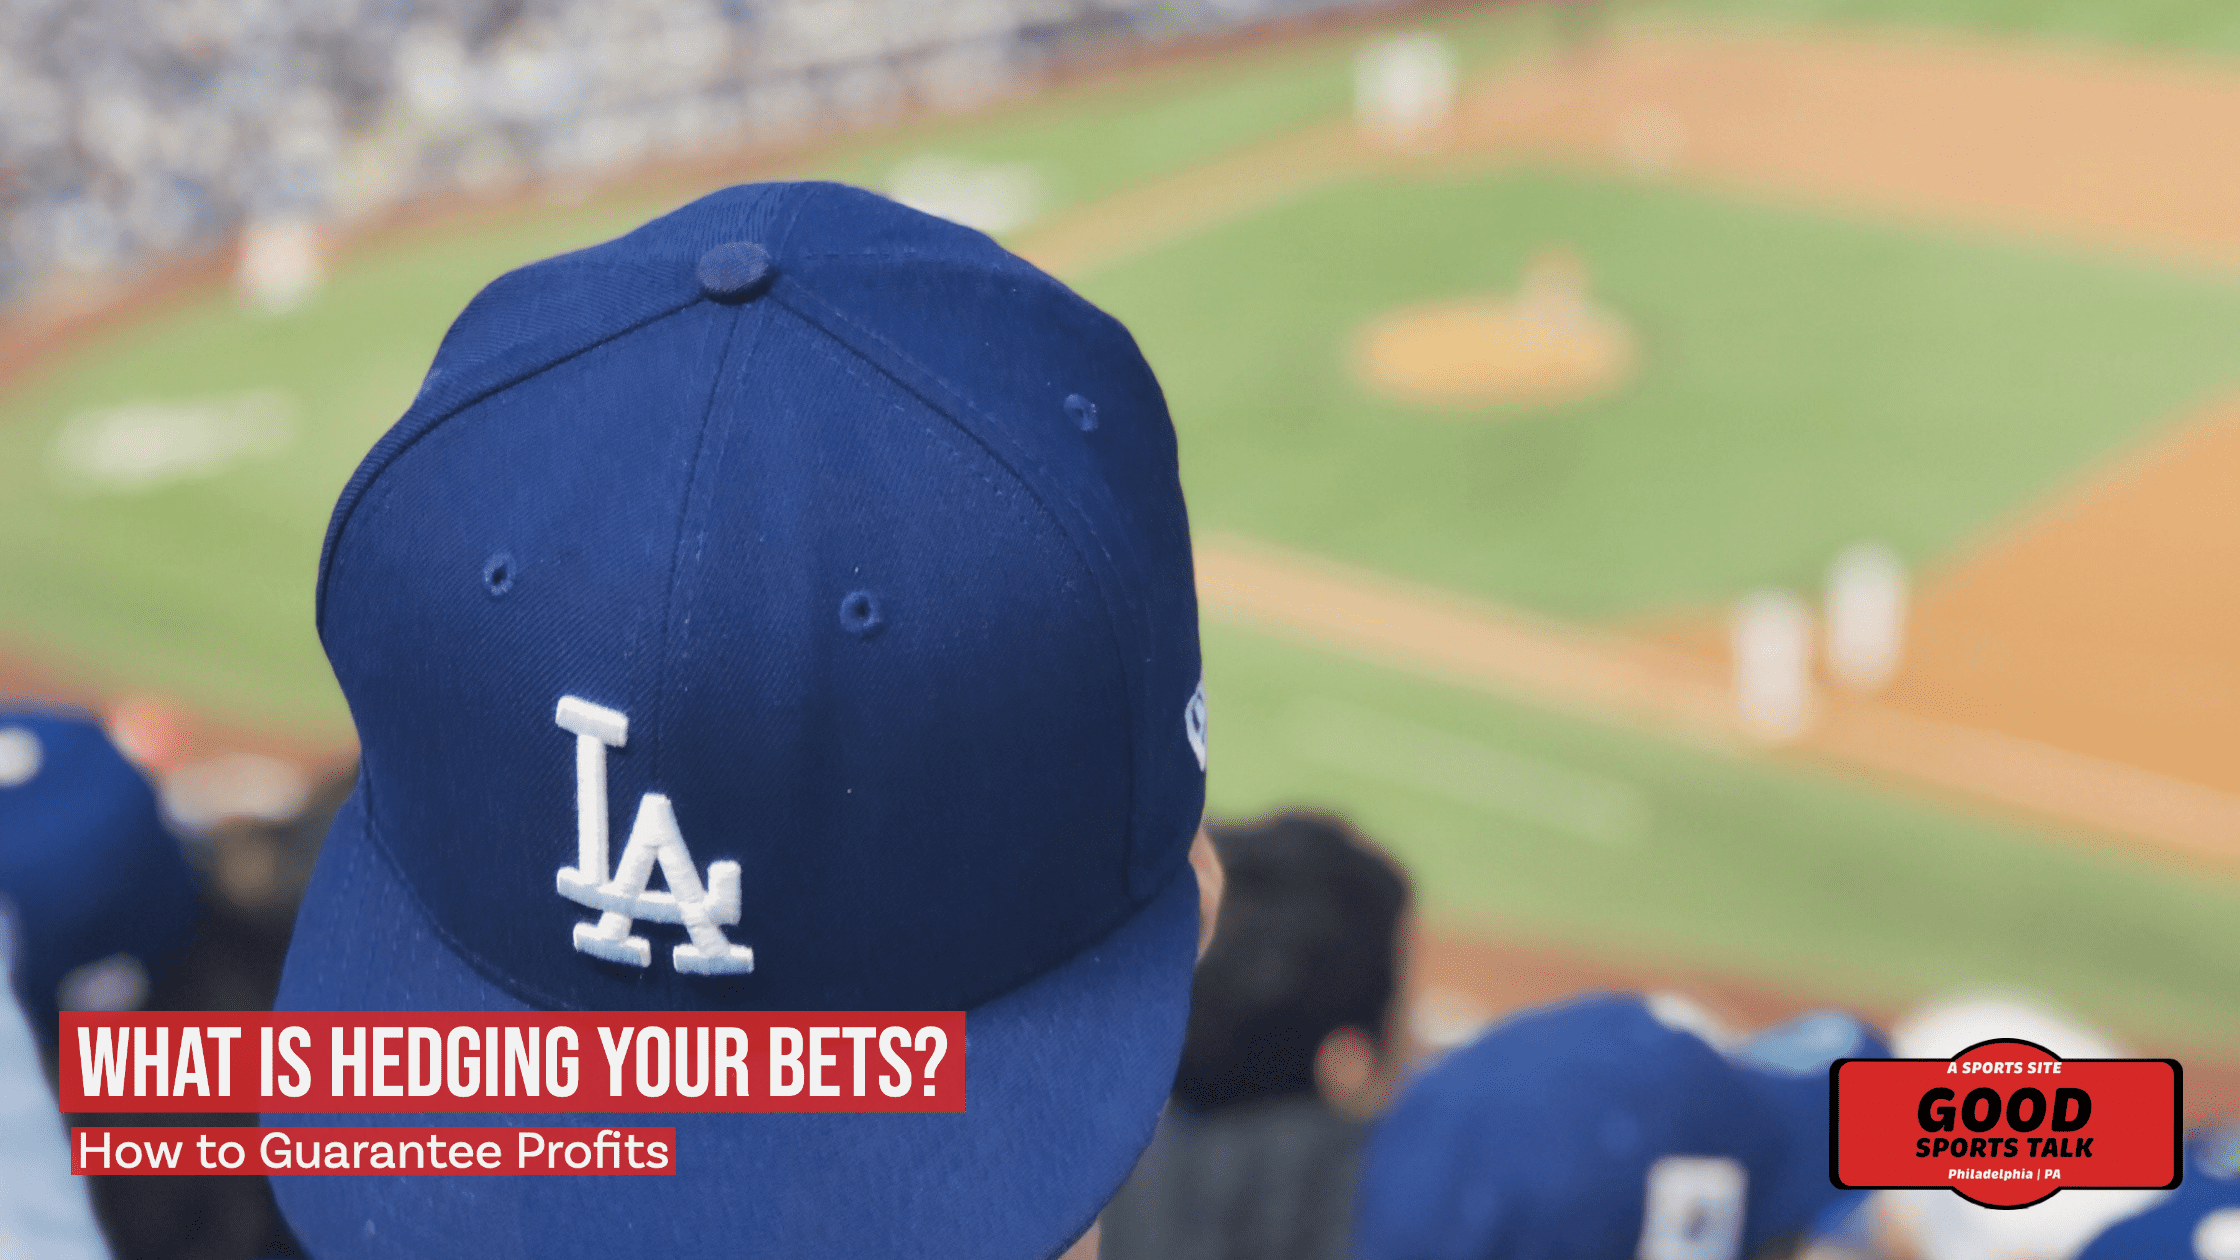 What is Hedging your bets? How to Guarantee Profits.